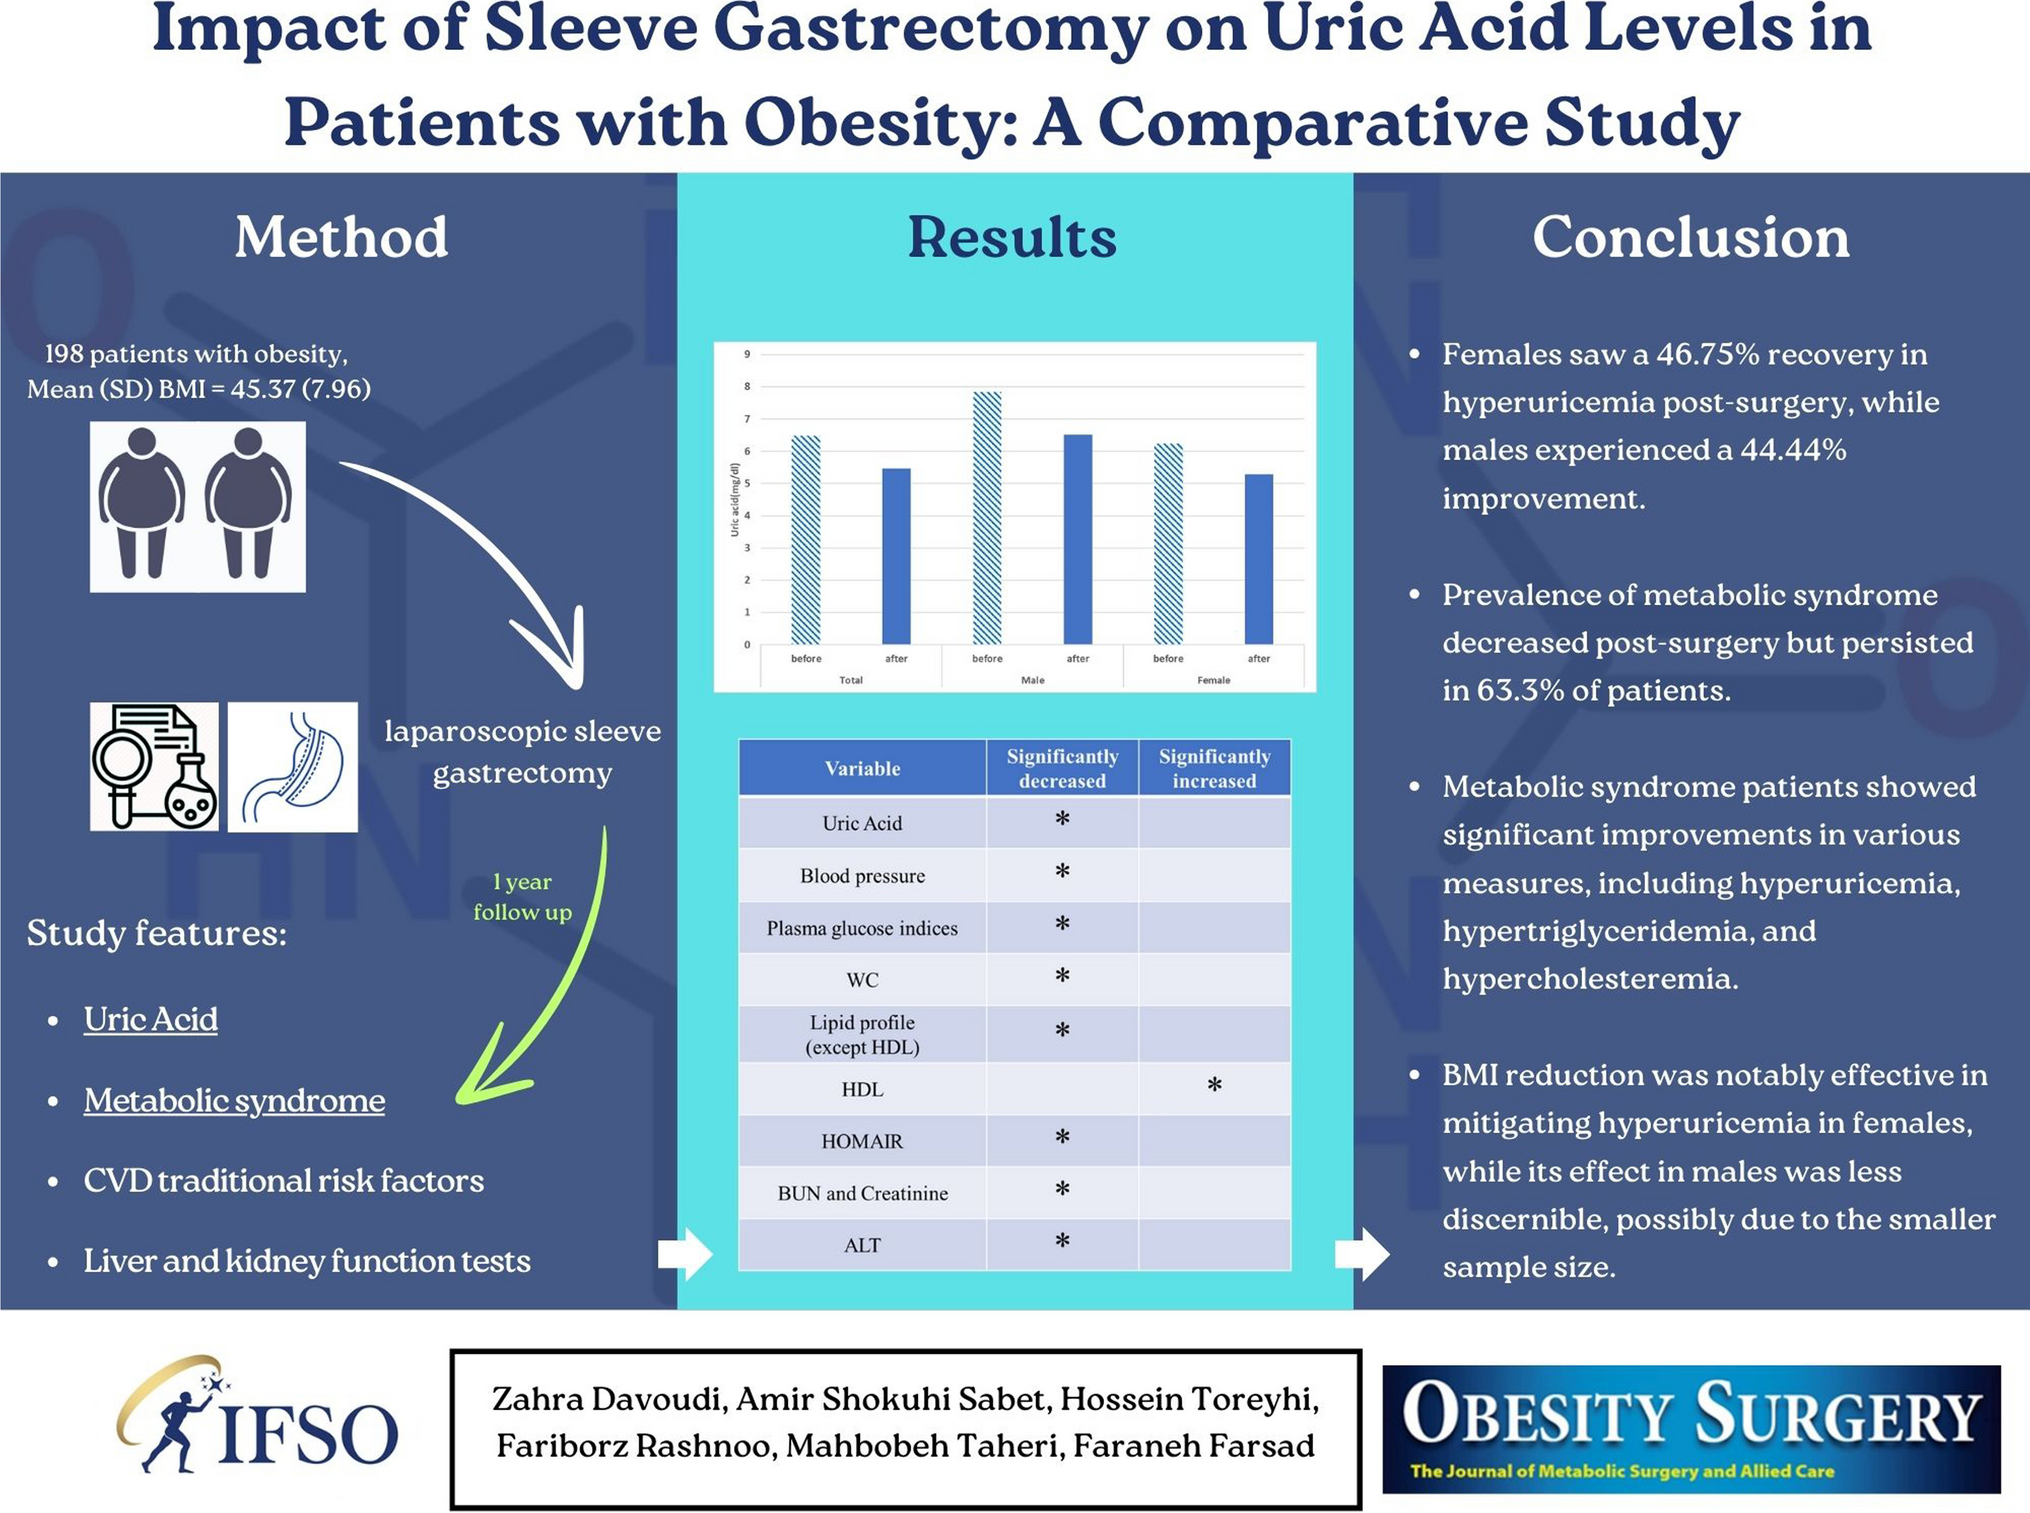 Impact of Sleeve Gastrectomy on Uric Acid Levels in Patients with Obesity: A Comparative Study